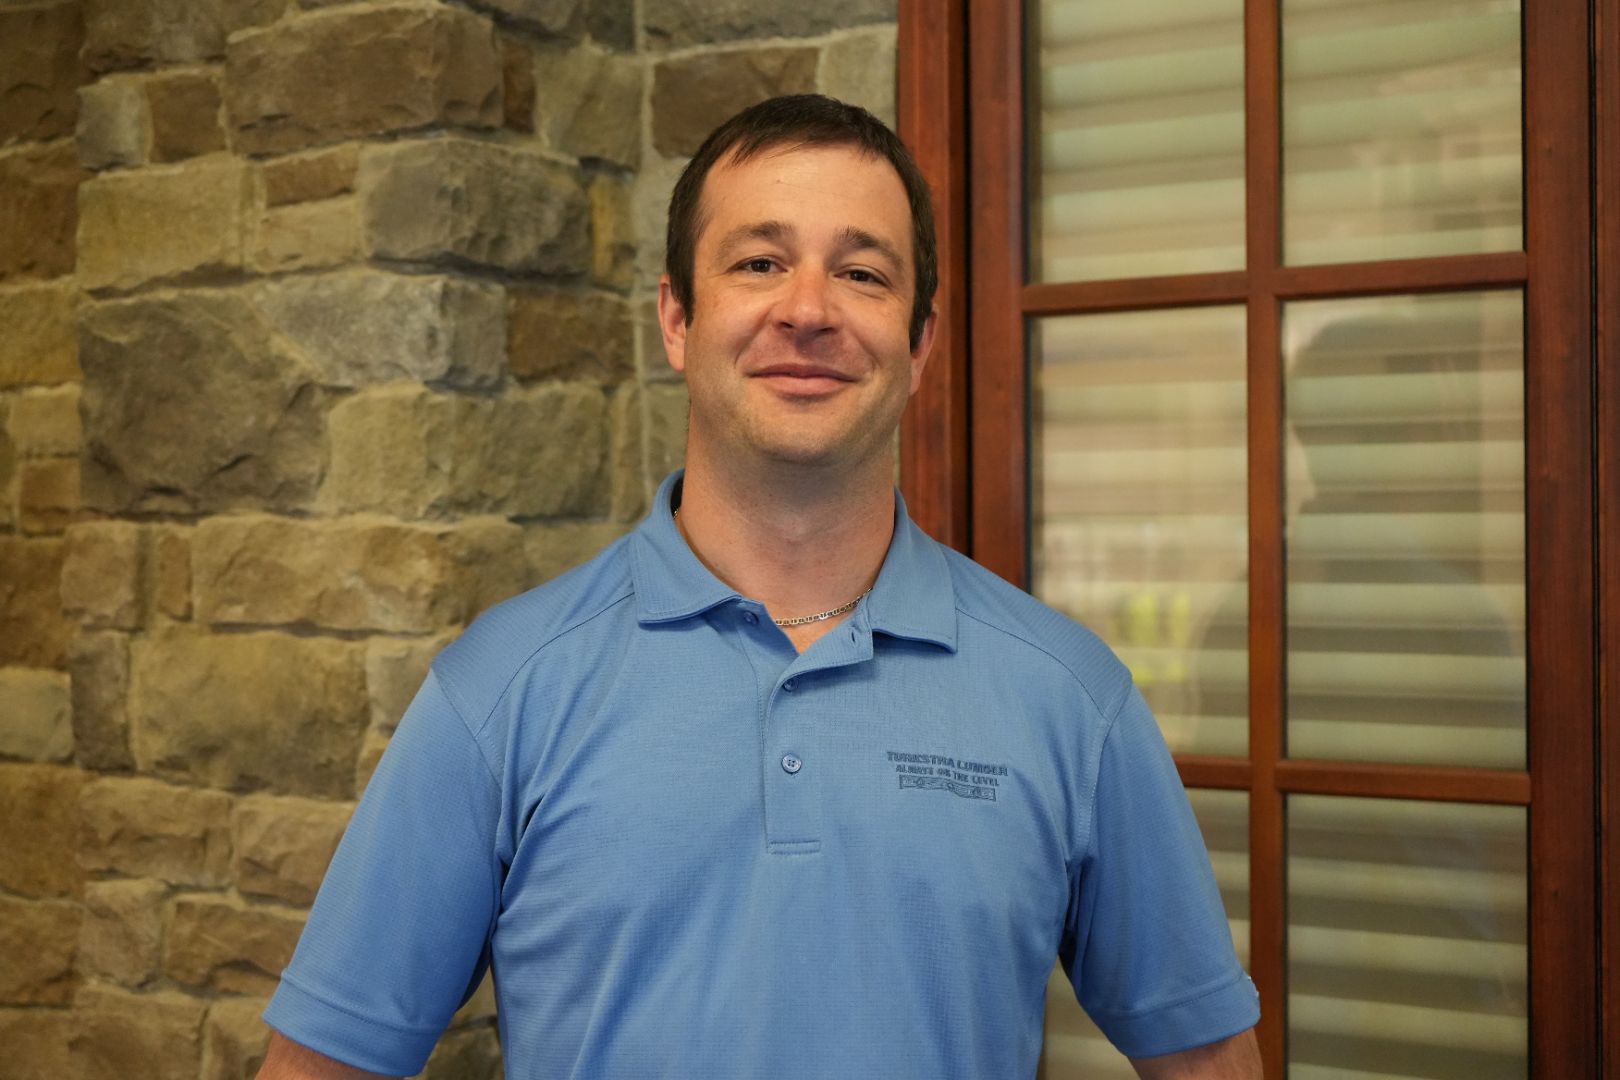 Kevin Martin - Our Executive Sales Manager here at Turkstra Lumber